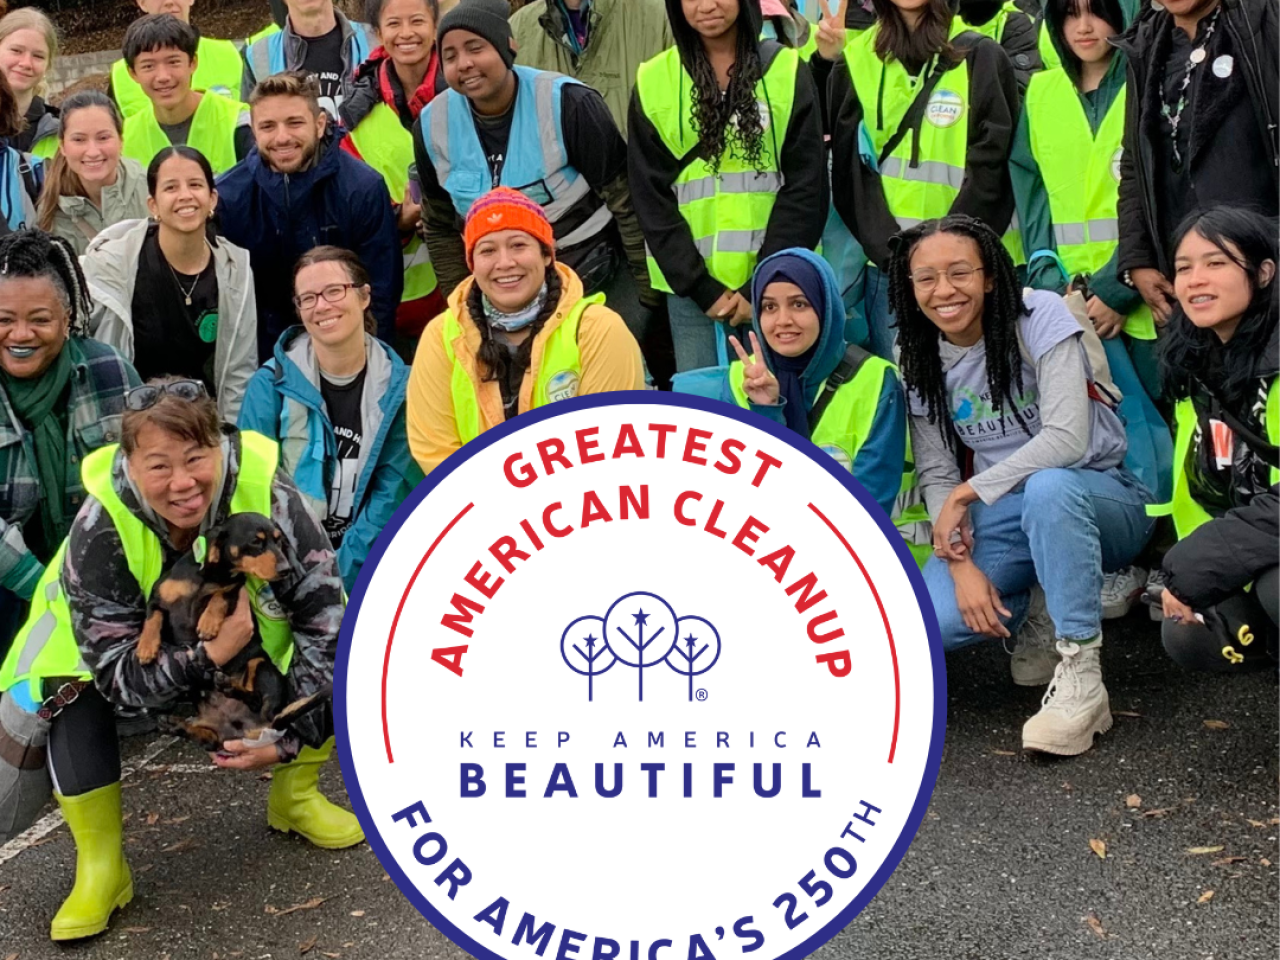 Launching the Greatest American Cleanup